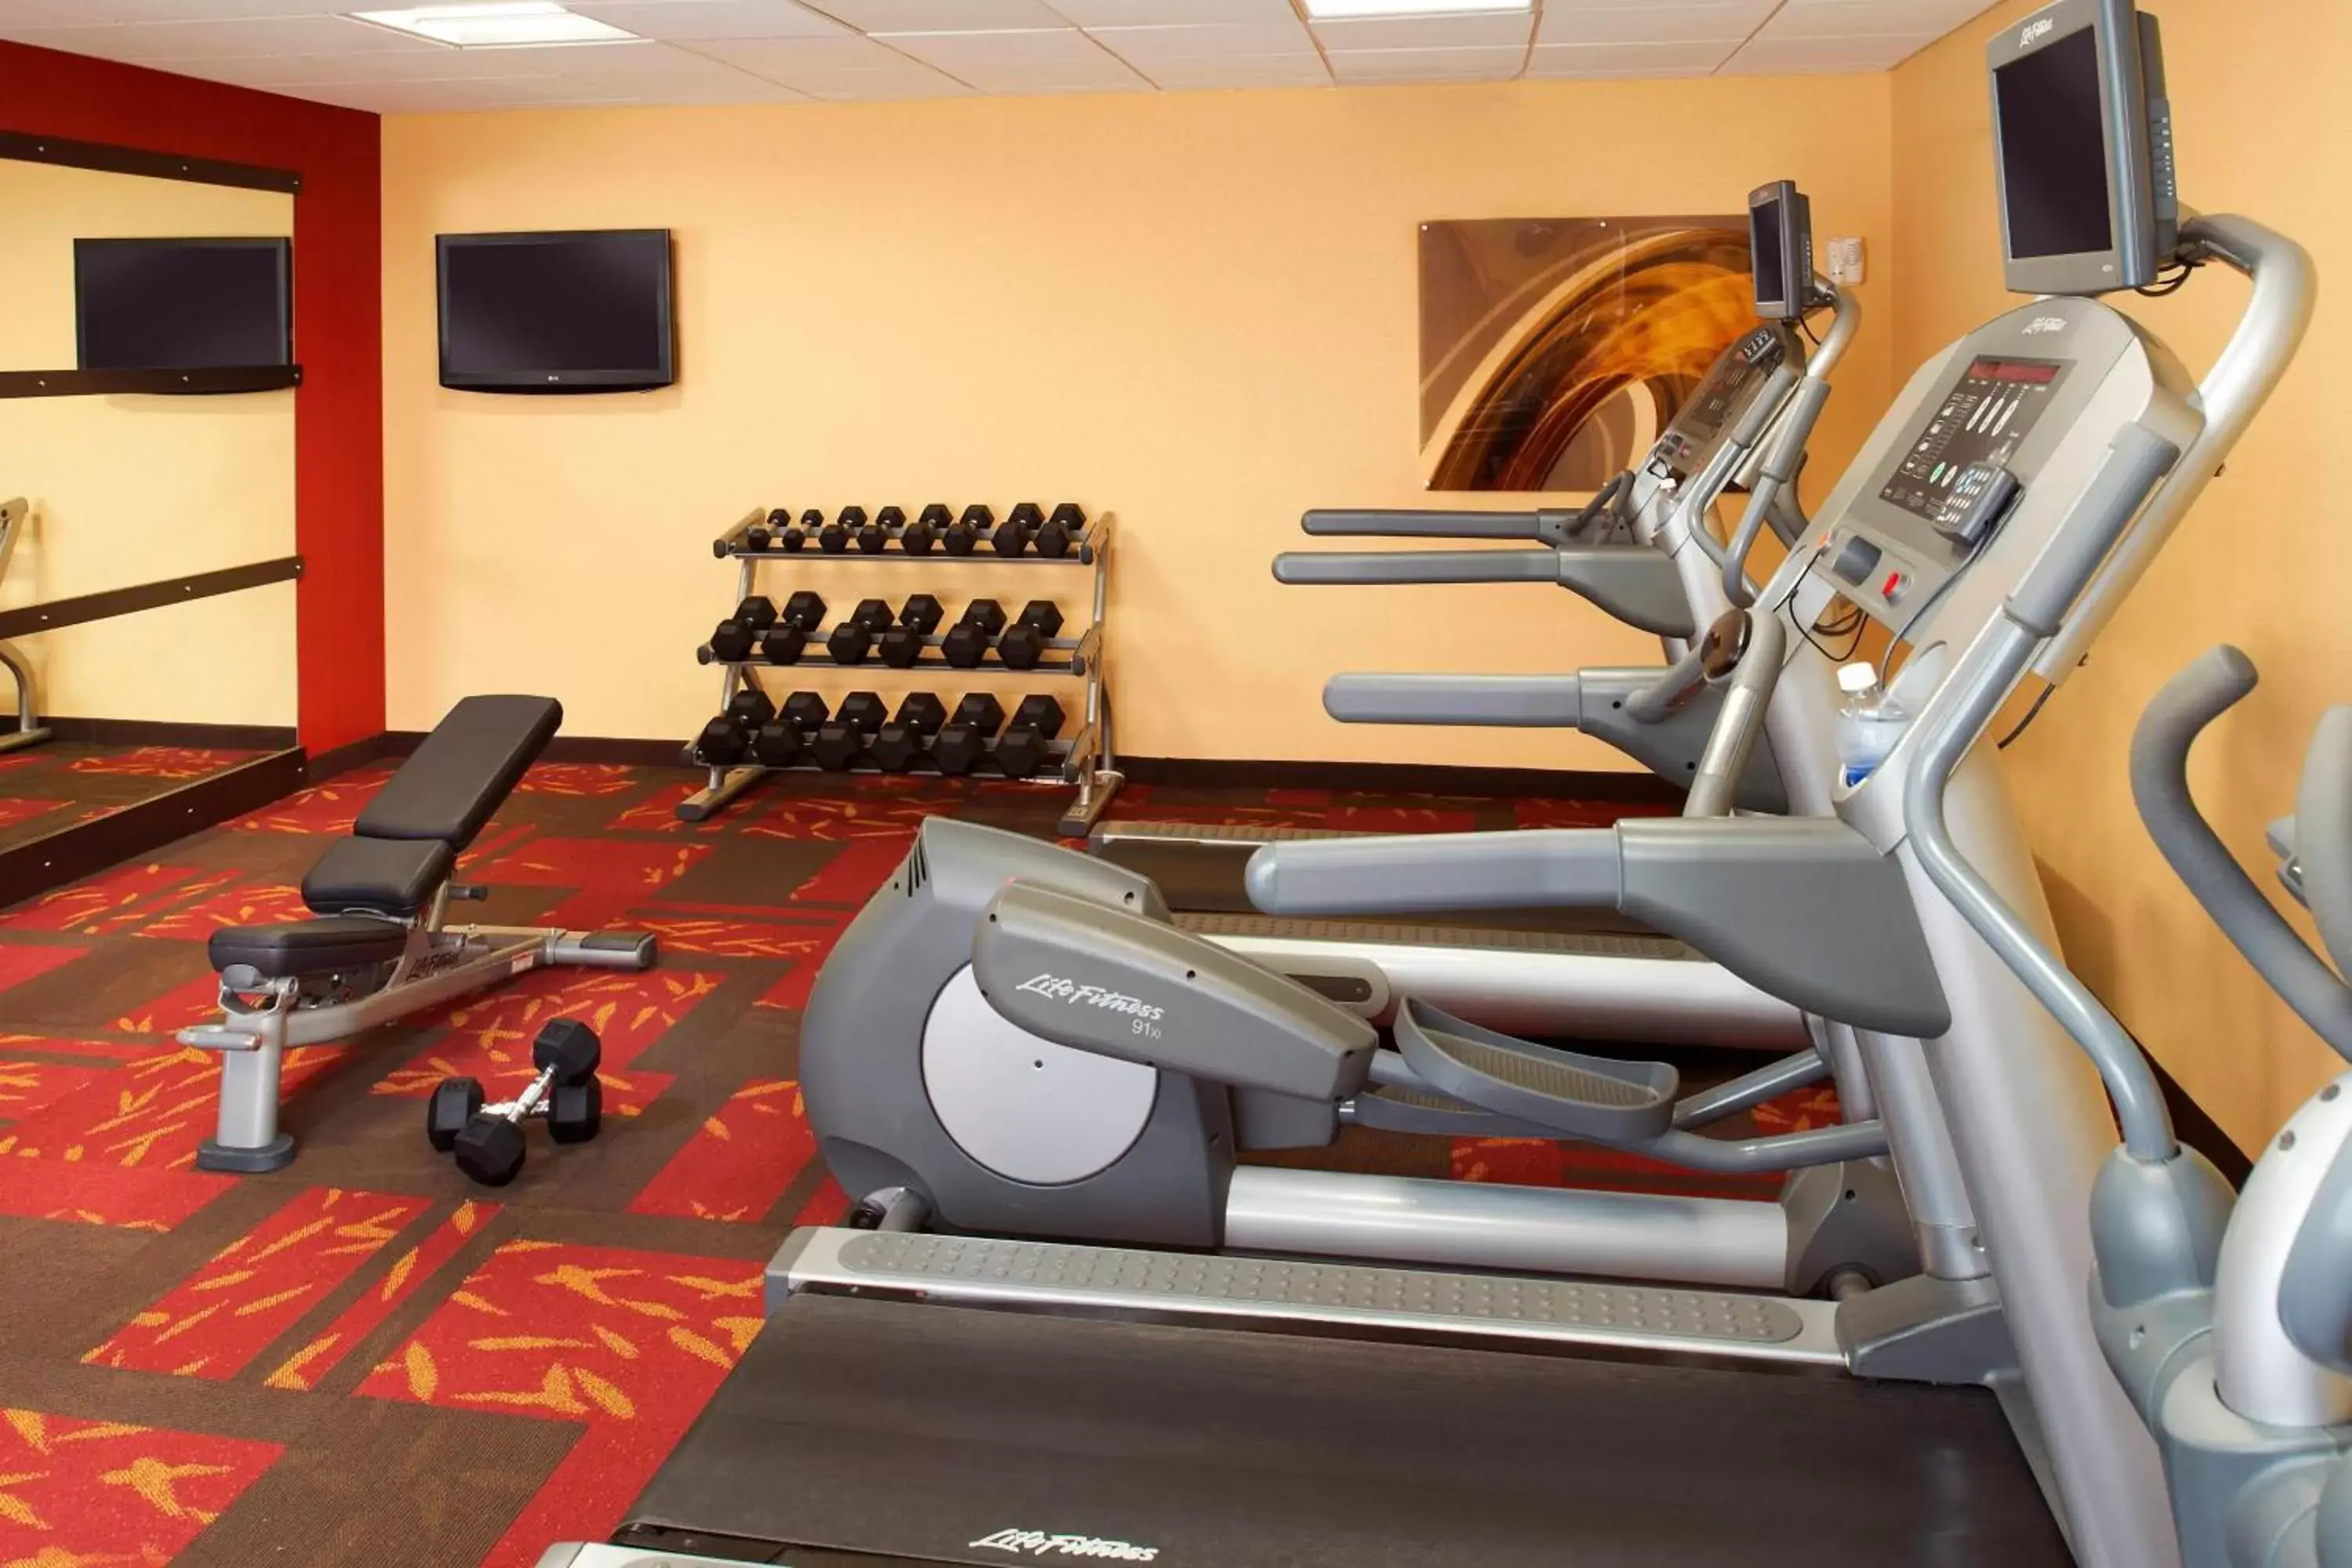 Fitness centre/facilities, Fitness Center/Facilities in Courtyard by Marriott Minneapolis-St. Paul Airport